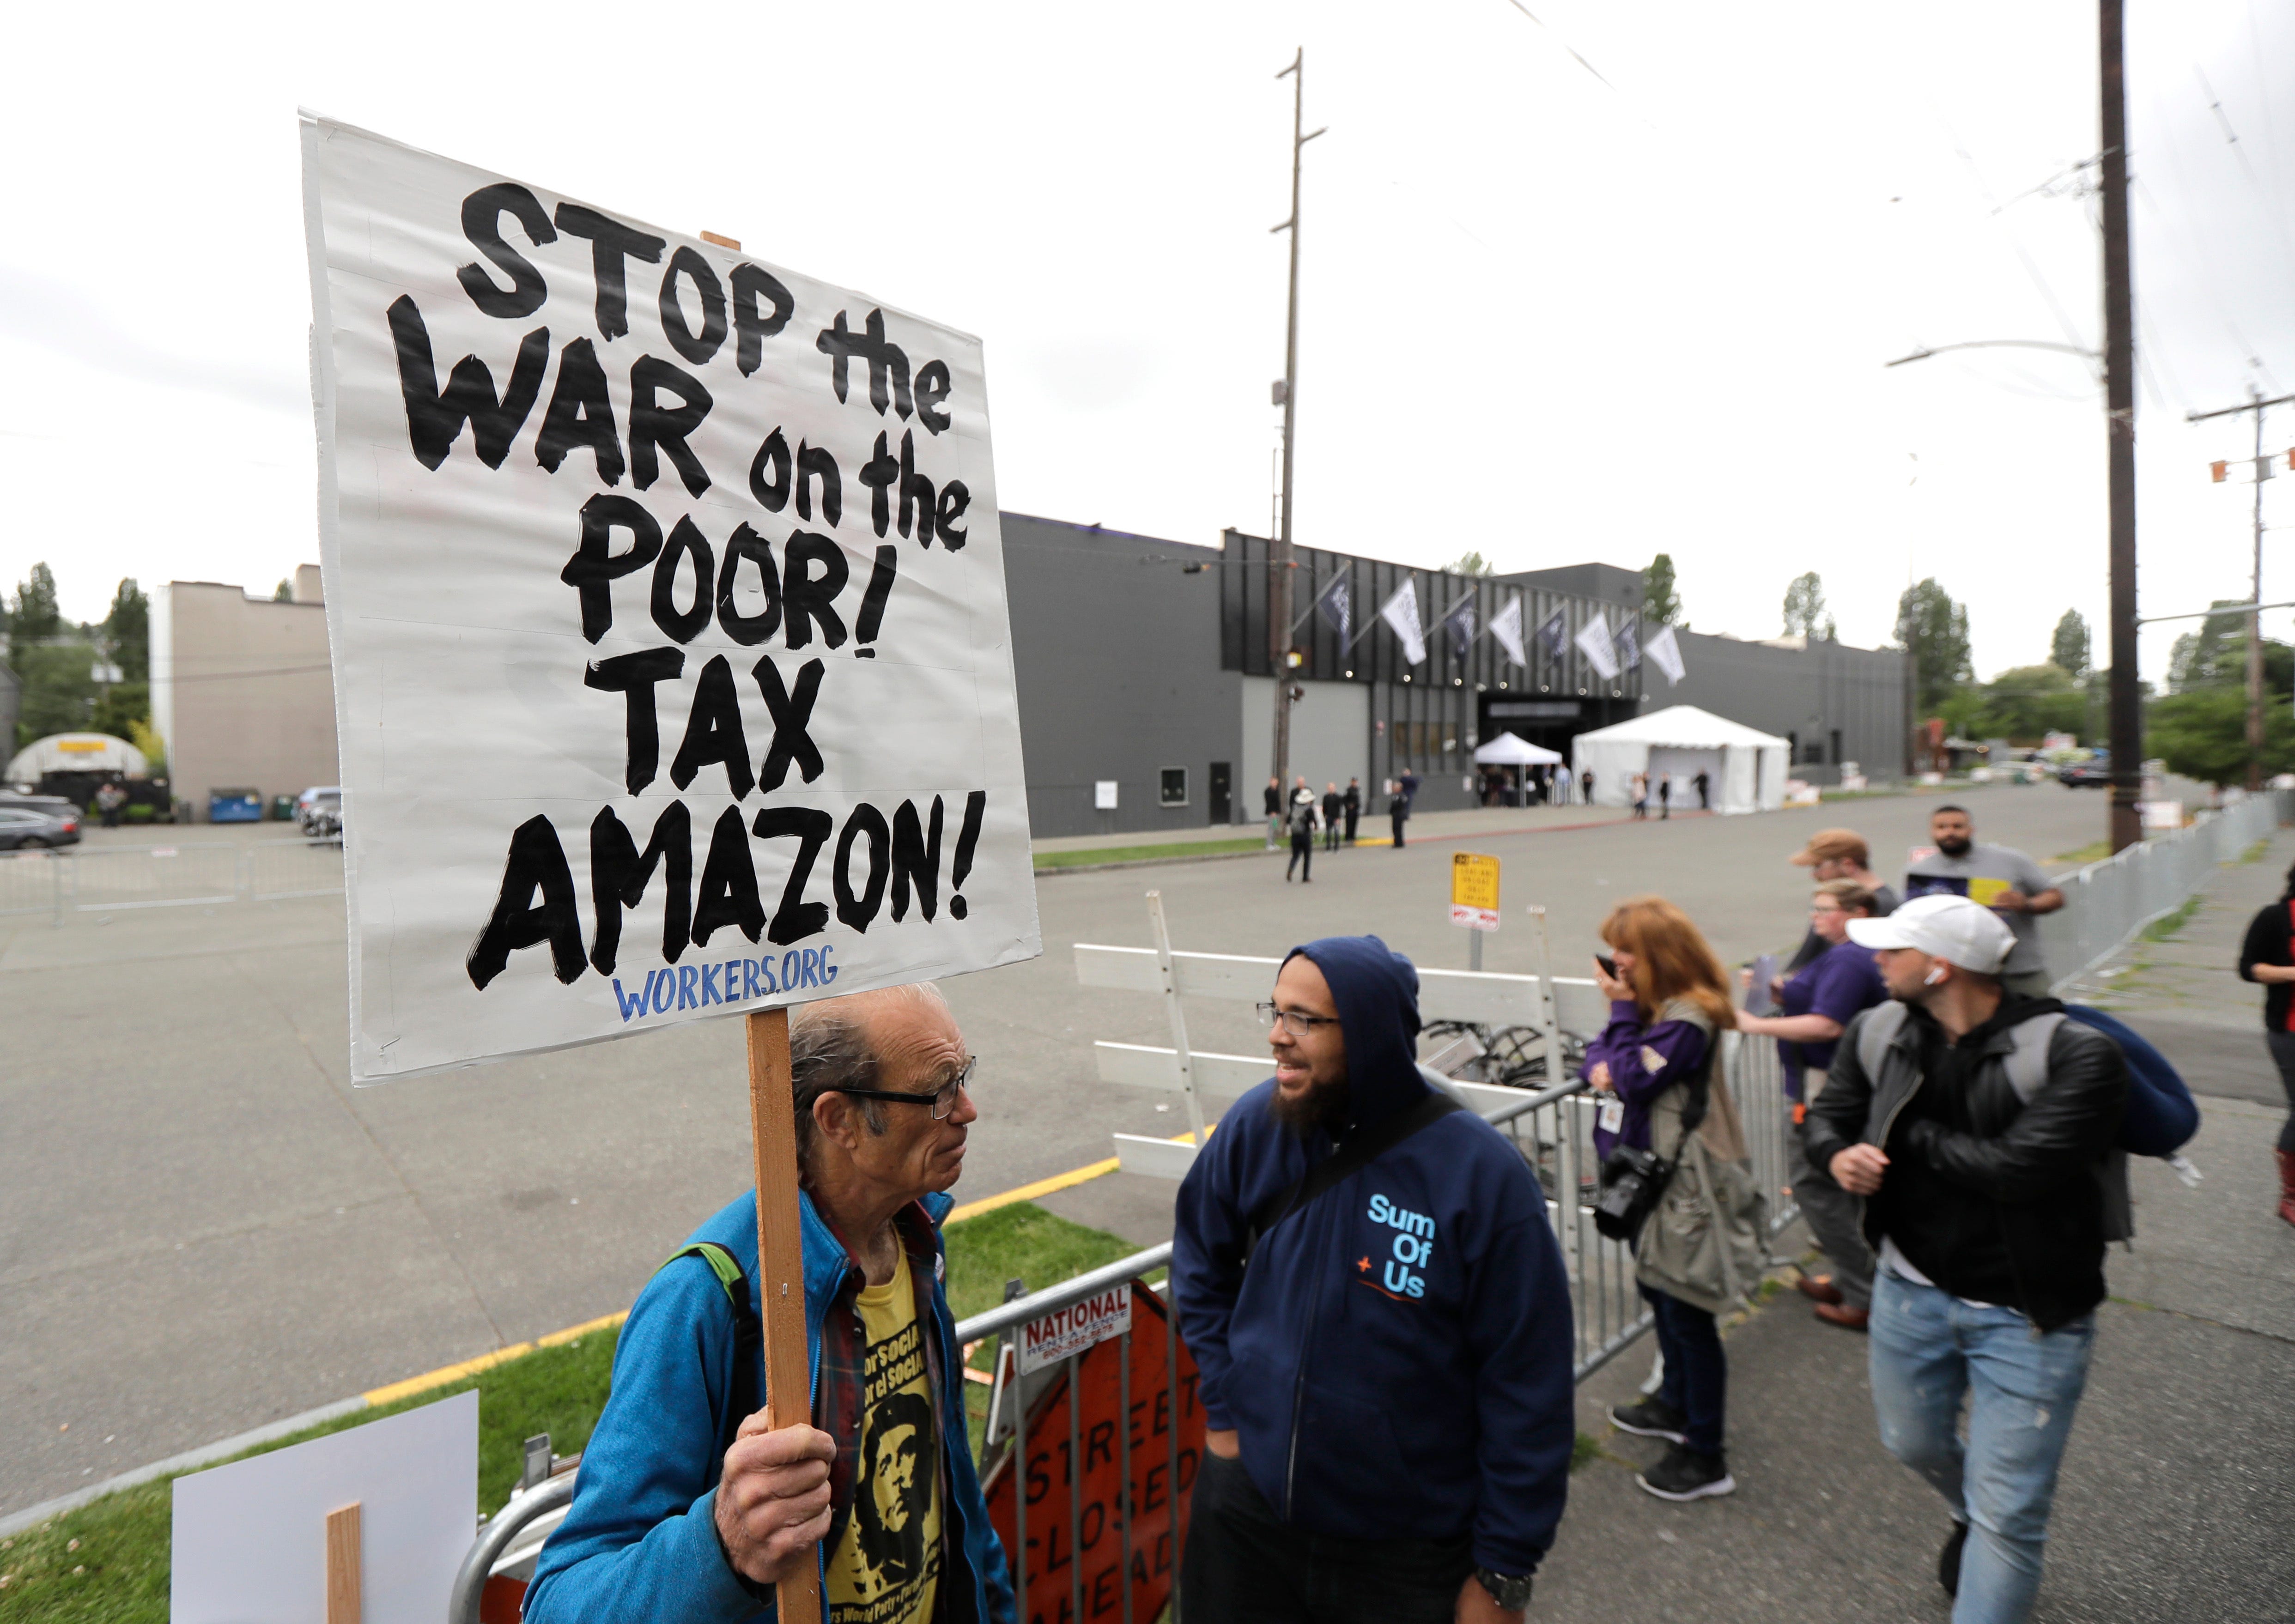 Amazon loses in Seattle, which joins other liberal communities chasing jobs away - USA TODAY